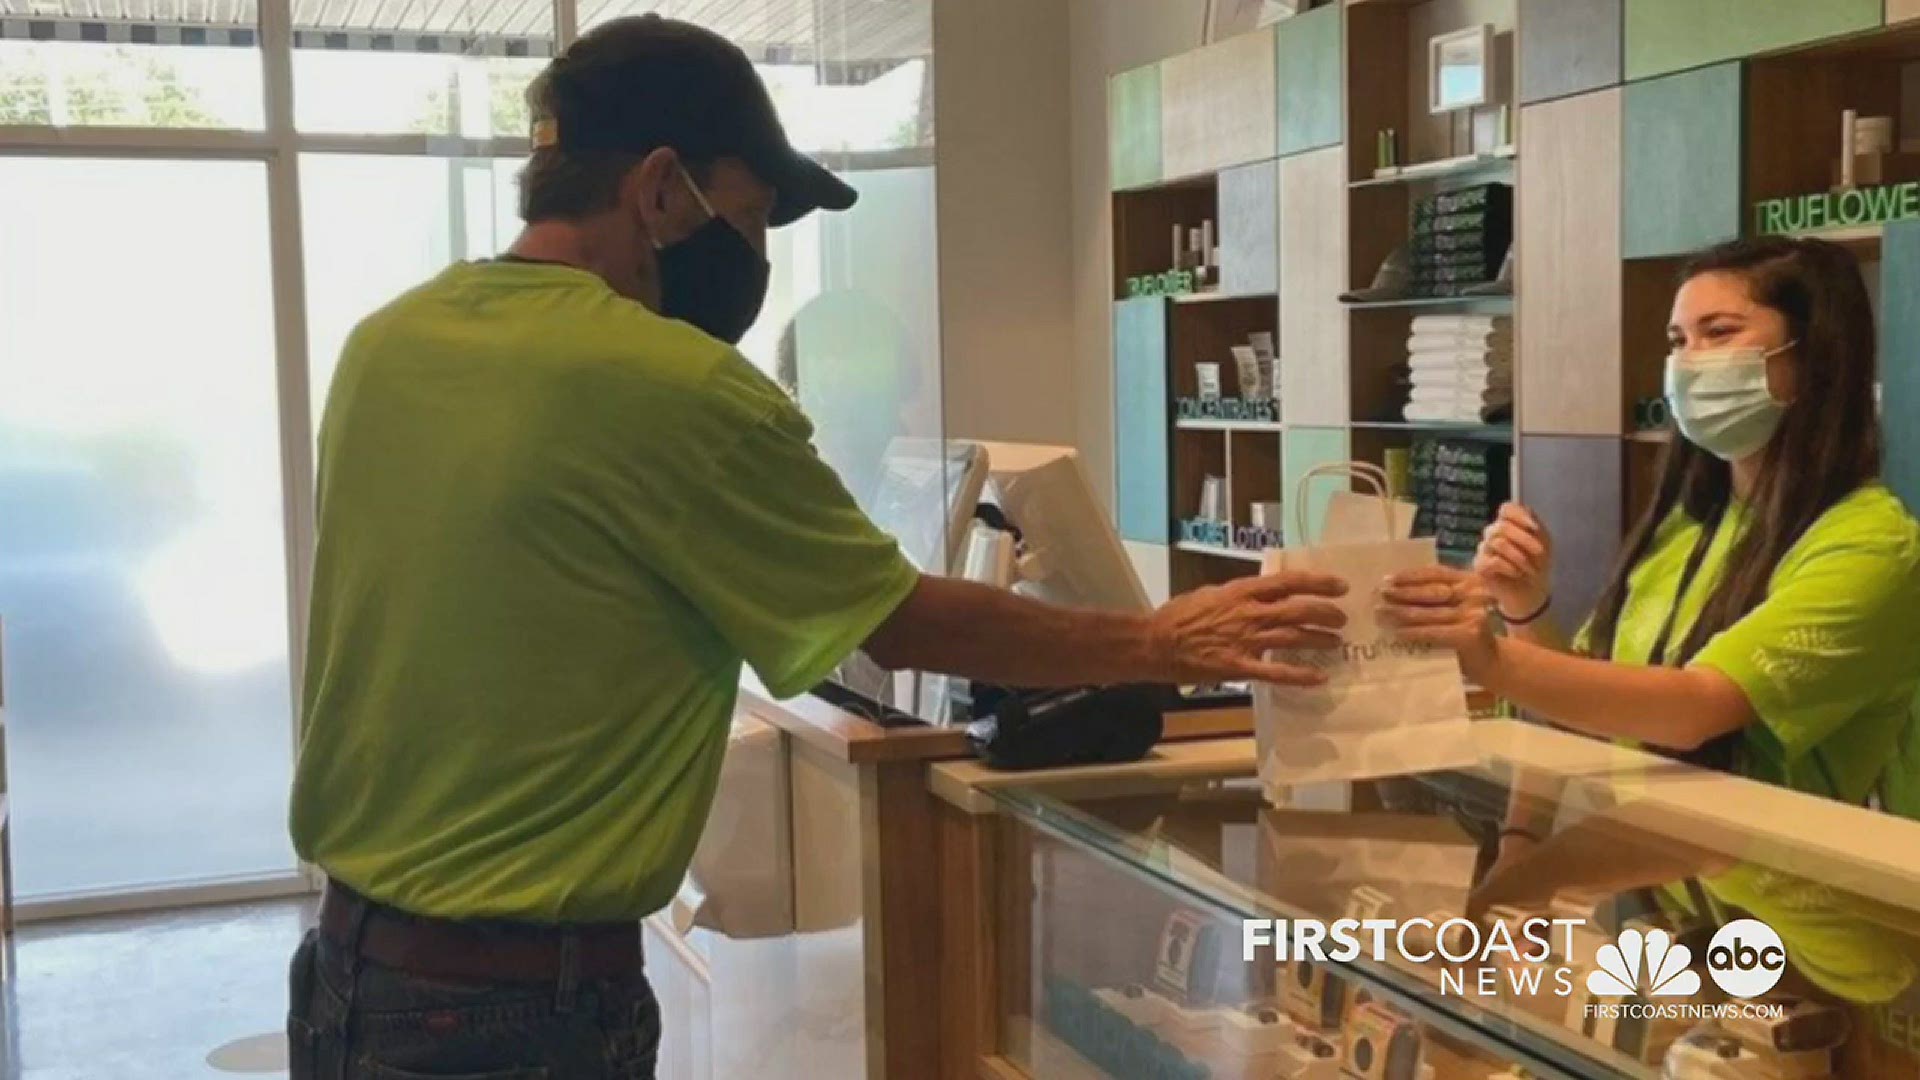 The Florida Dept. of Health approved the sale of edible marijuana for medical patients last week. Wednesday, the first edibles were sold at a Tallahassee dispensary.